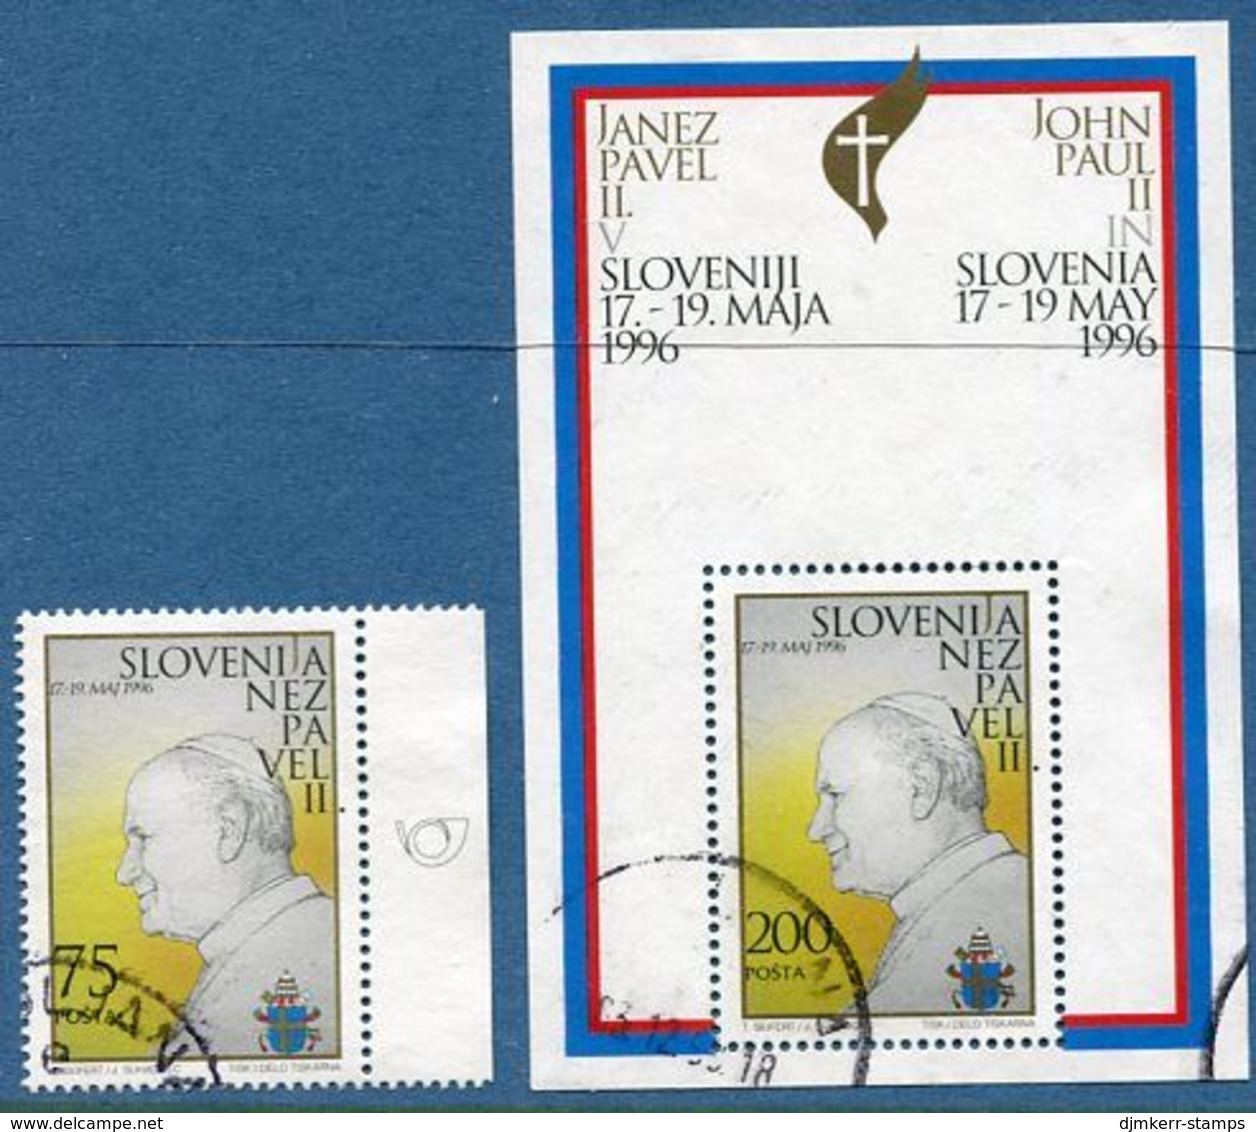 SLOVENIA 1996 Papal Visit Stamp And Block Used..  Michel 144 + Block 2 - Slovenia